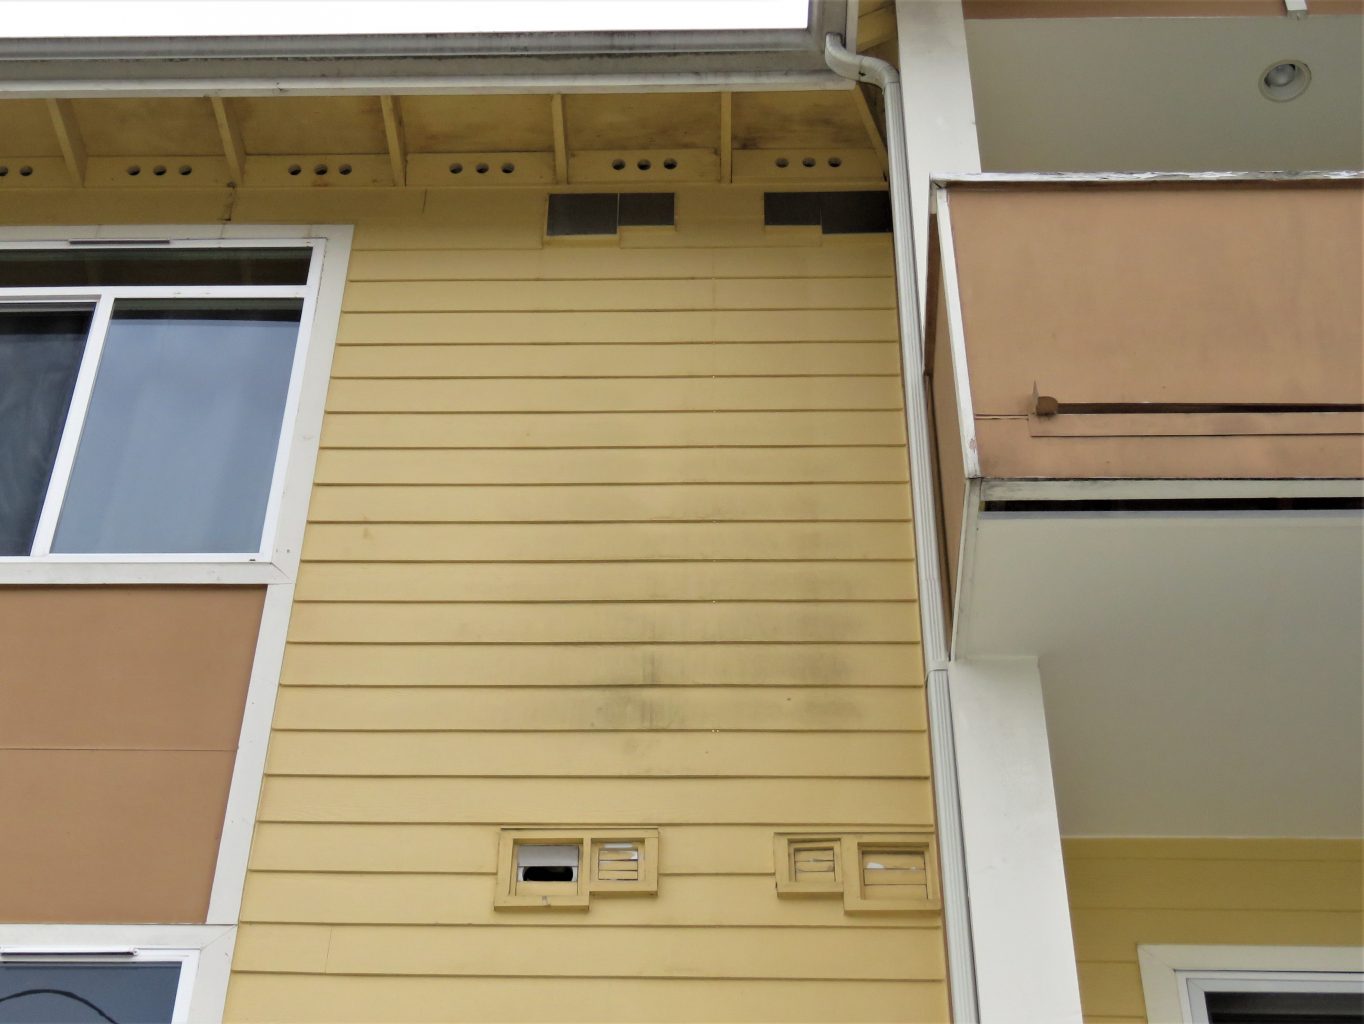 Do your exhaust vents terminate at your soffits?